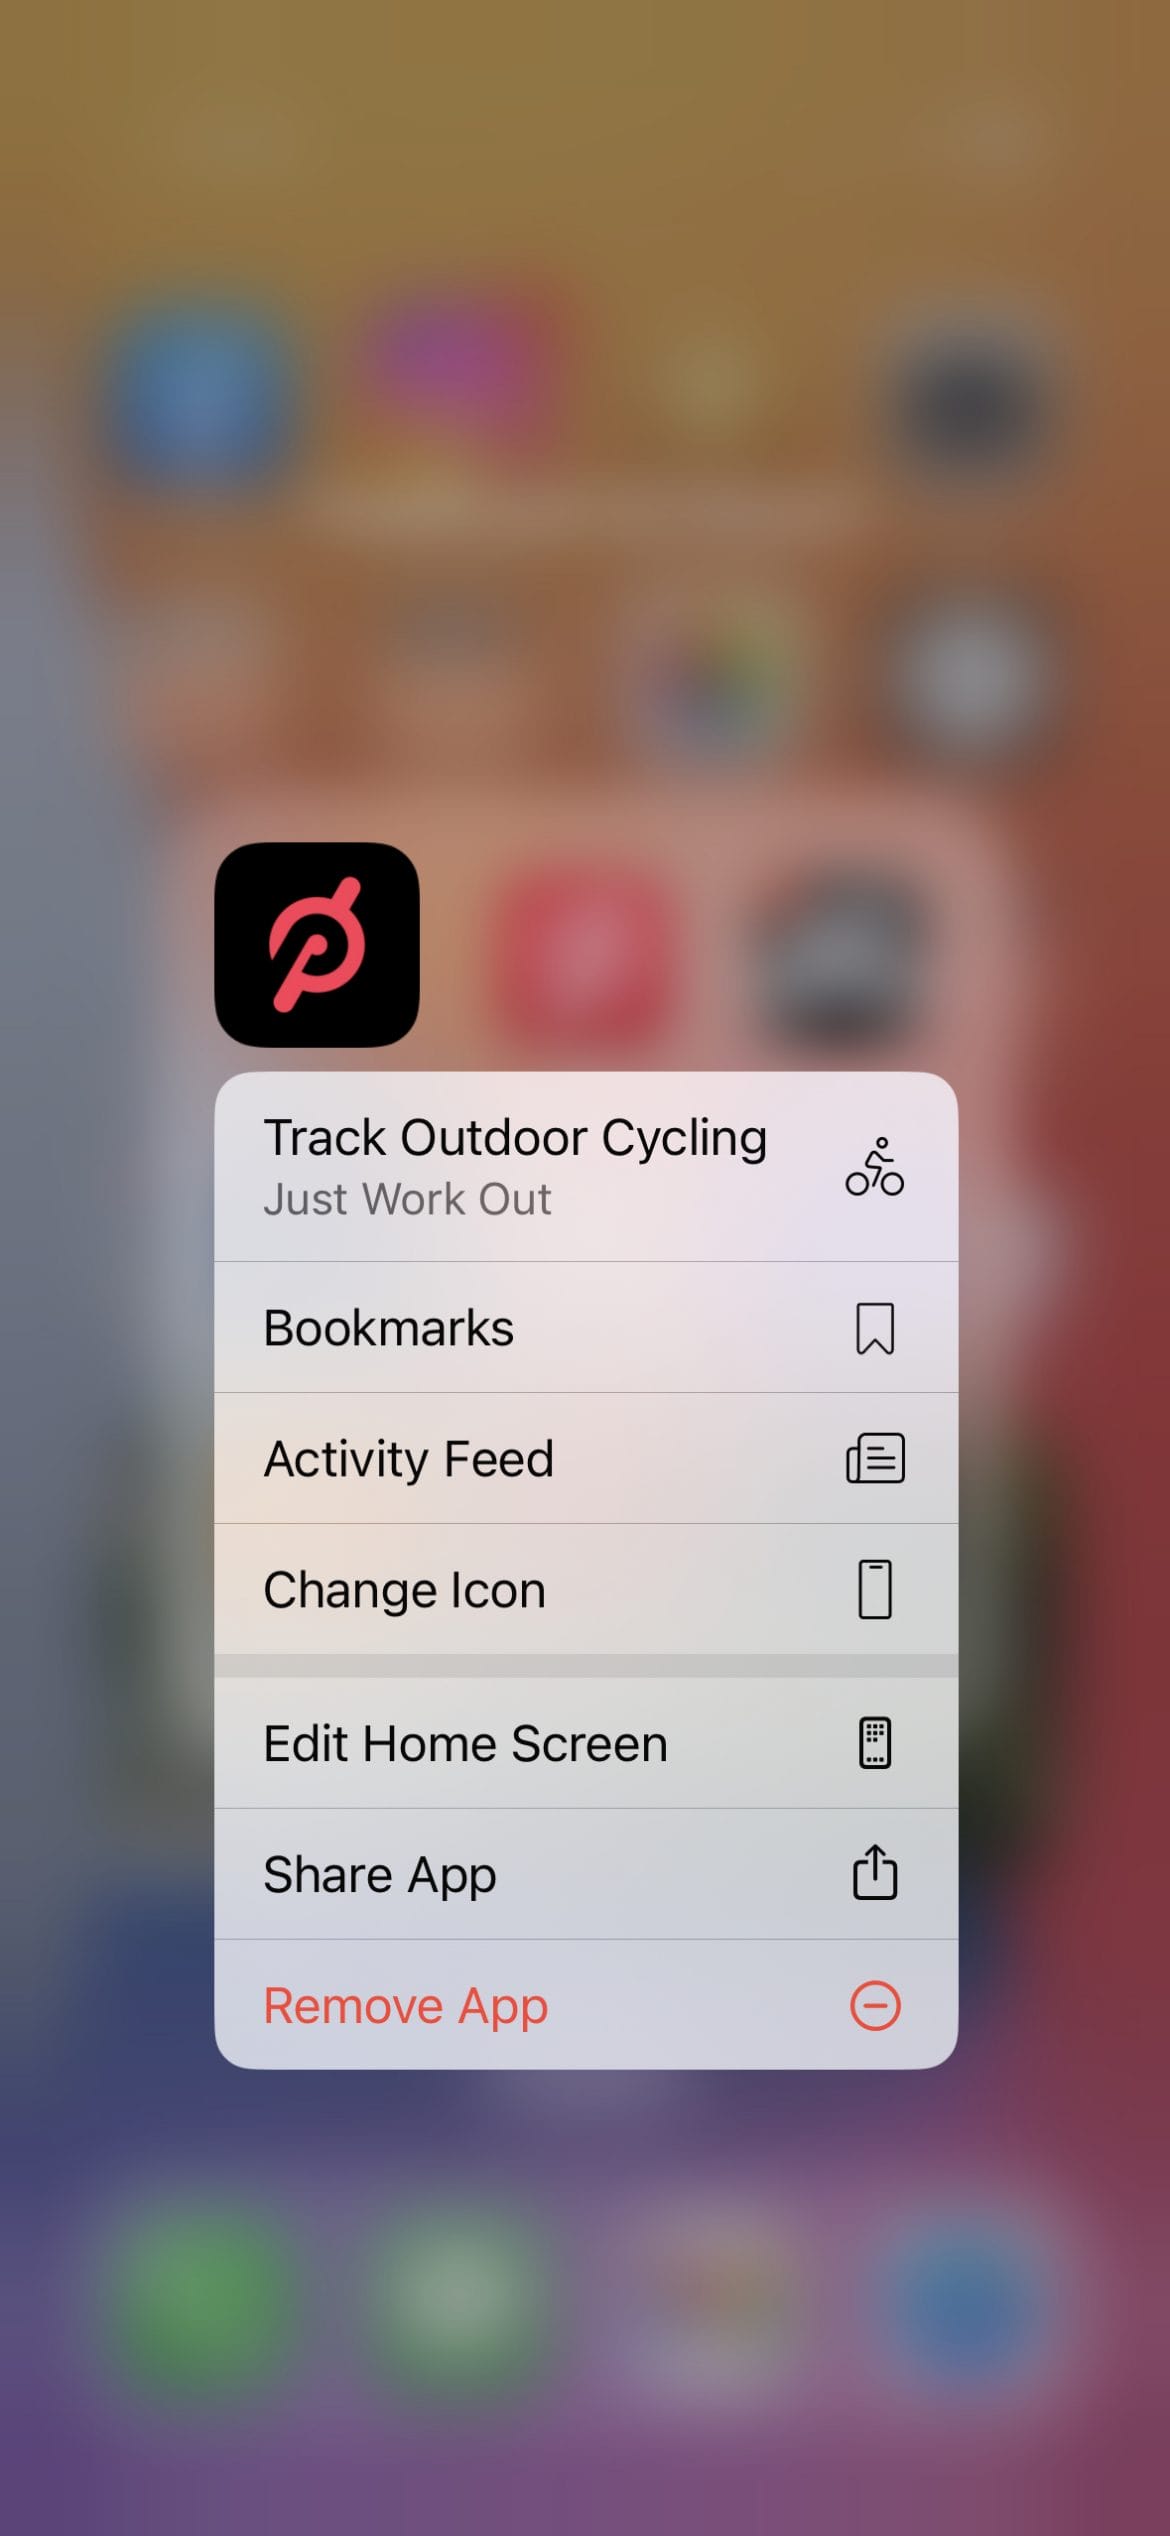 Option to change app icon directly from iOS home screen.